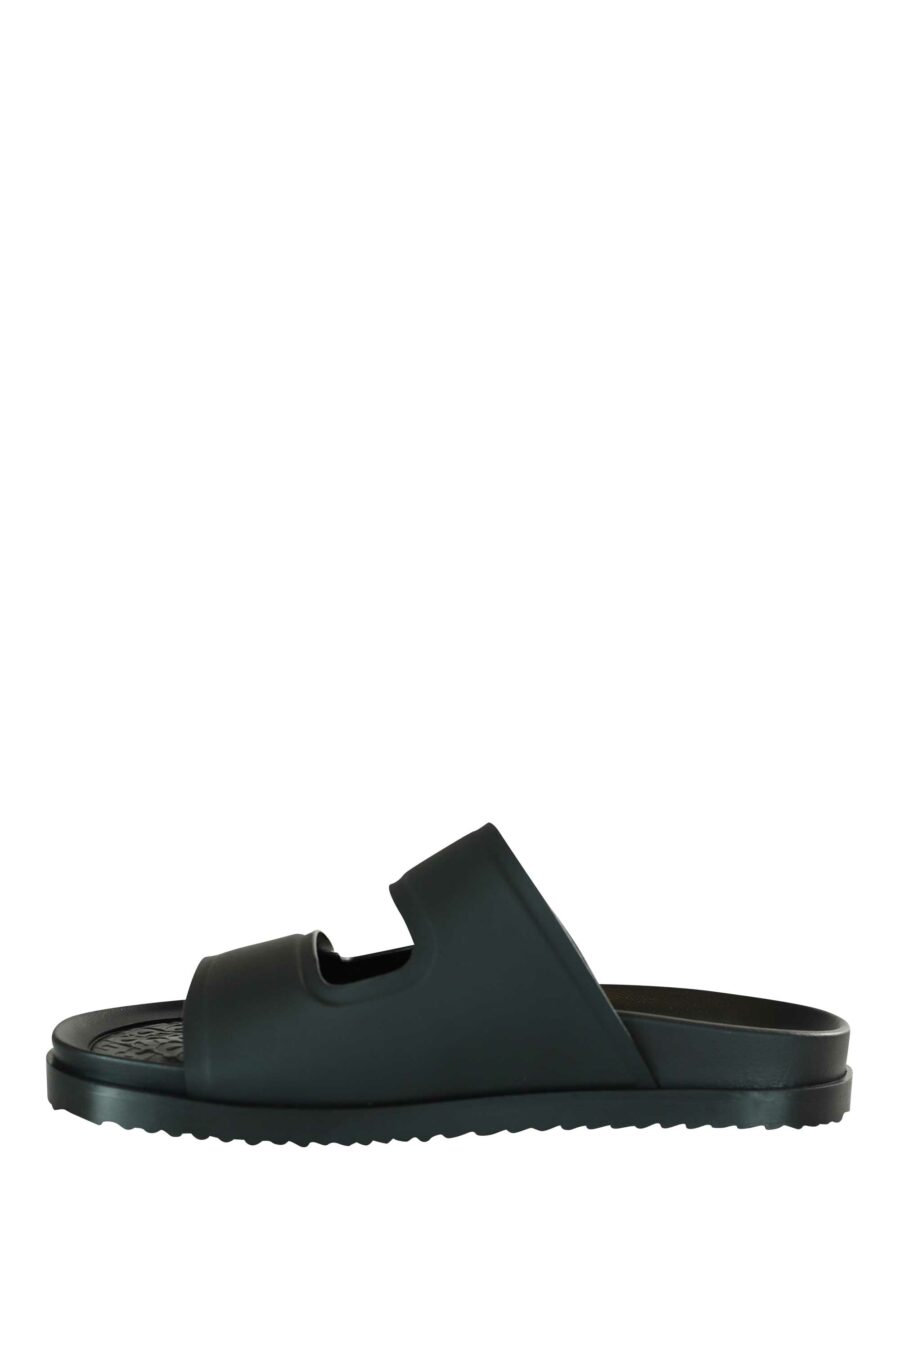 Black sandals with white "dsq2" logo and velcro - 8055777203200 3